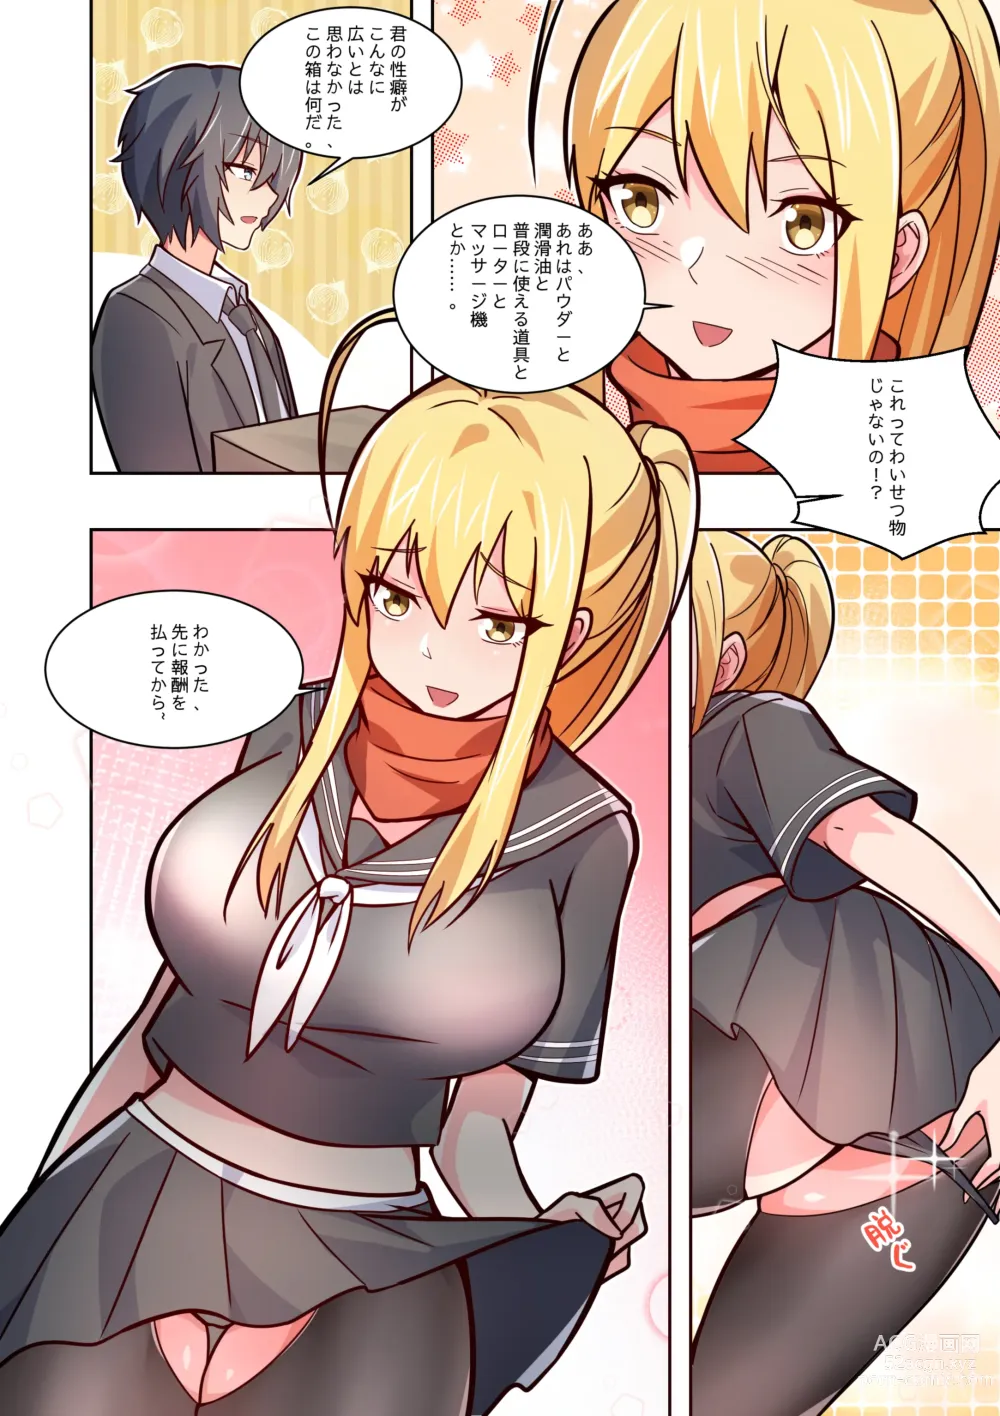 Page 38 of doujinshi ノーパン彼女